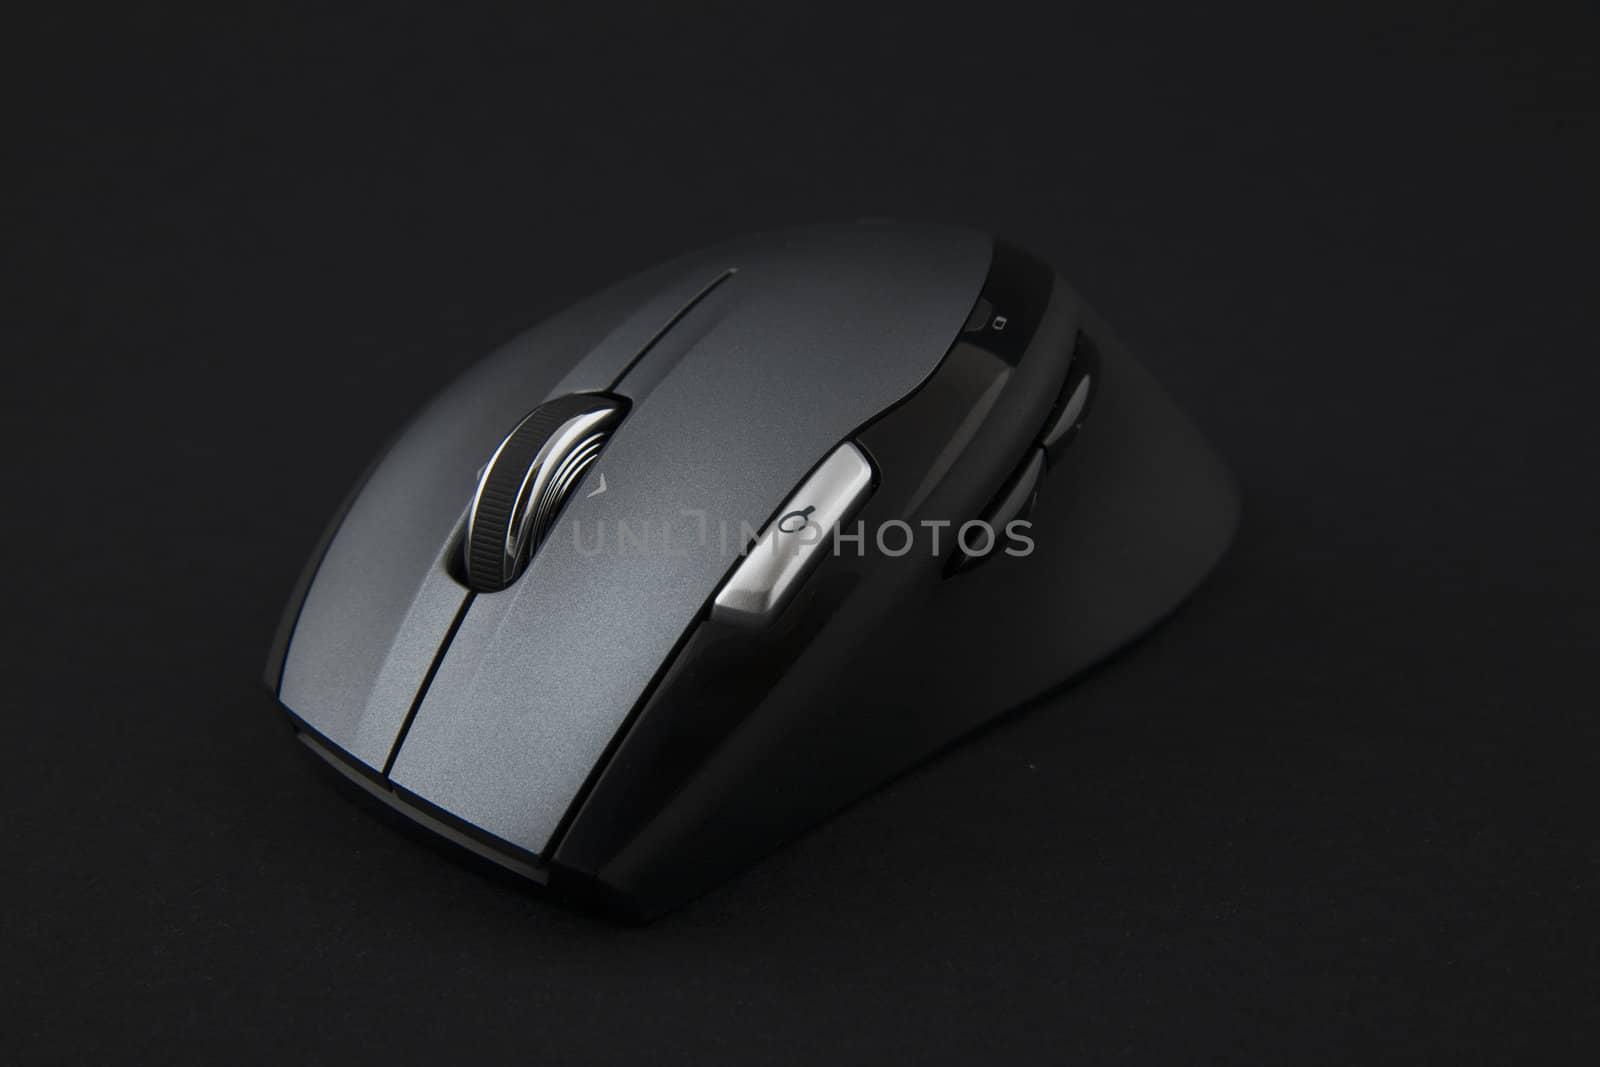 cordless mouse by furzyk73